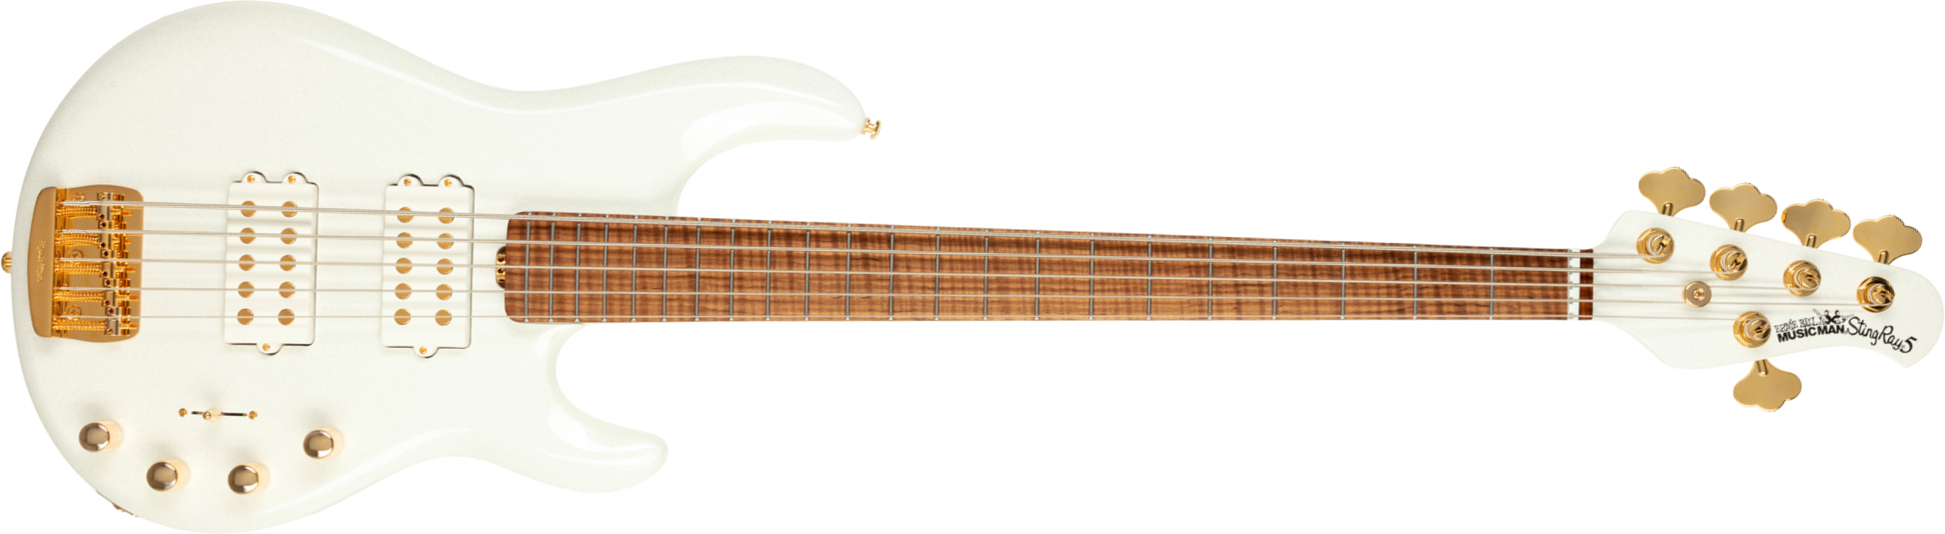 Music Man Stingray Special 2h 5c Bfr Active Mn #f88092 - Crescendo - Solid body electric bass - Main picture